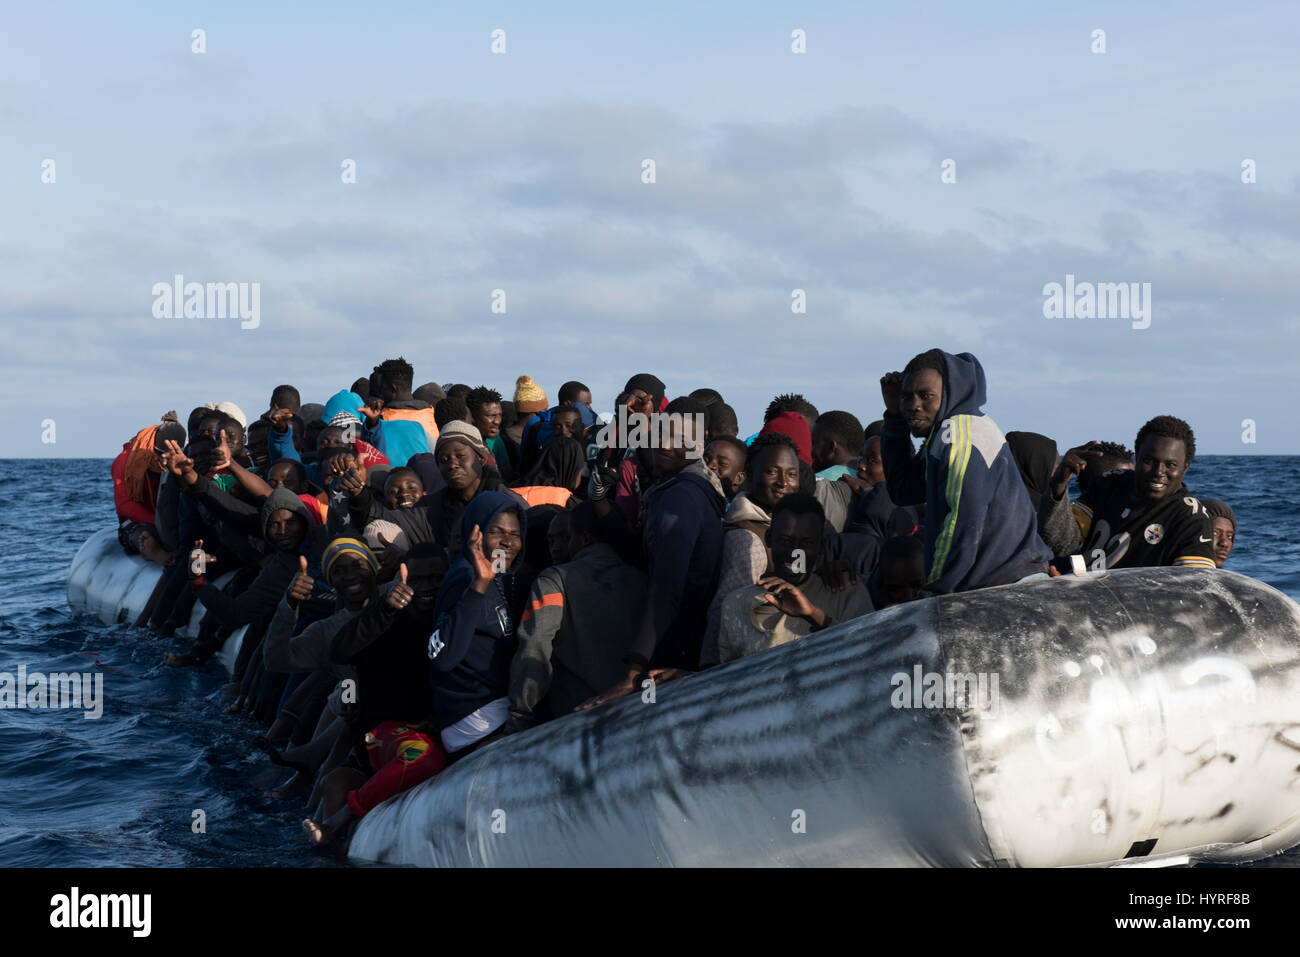 About 150 refugees/migrants from africa sitting on a rubberboat in bad condition and want to cross the mediterrean sea to europe. Stock Photo